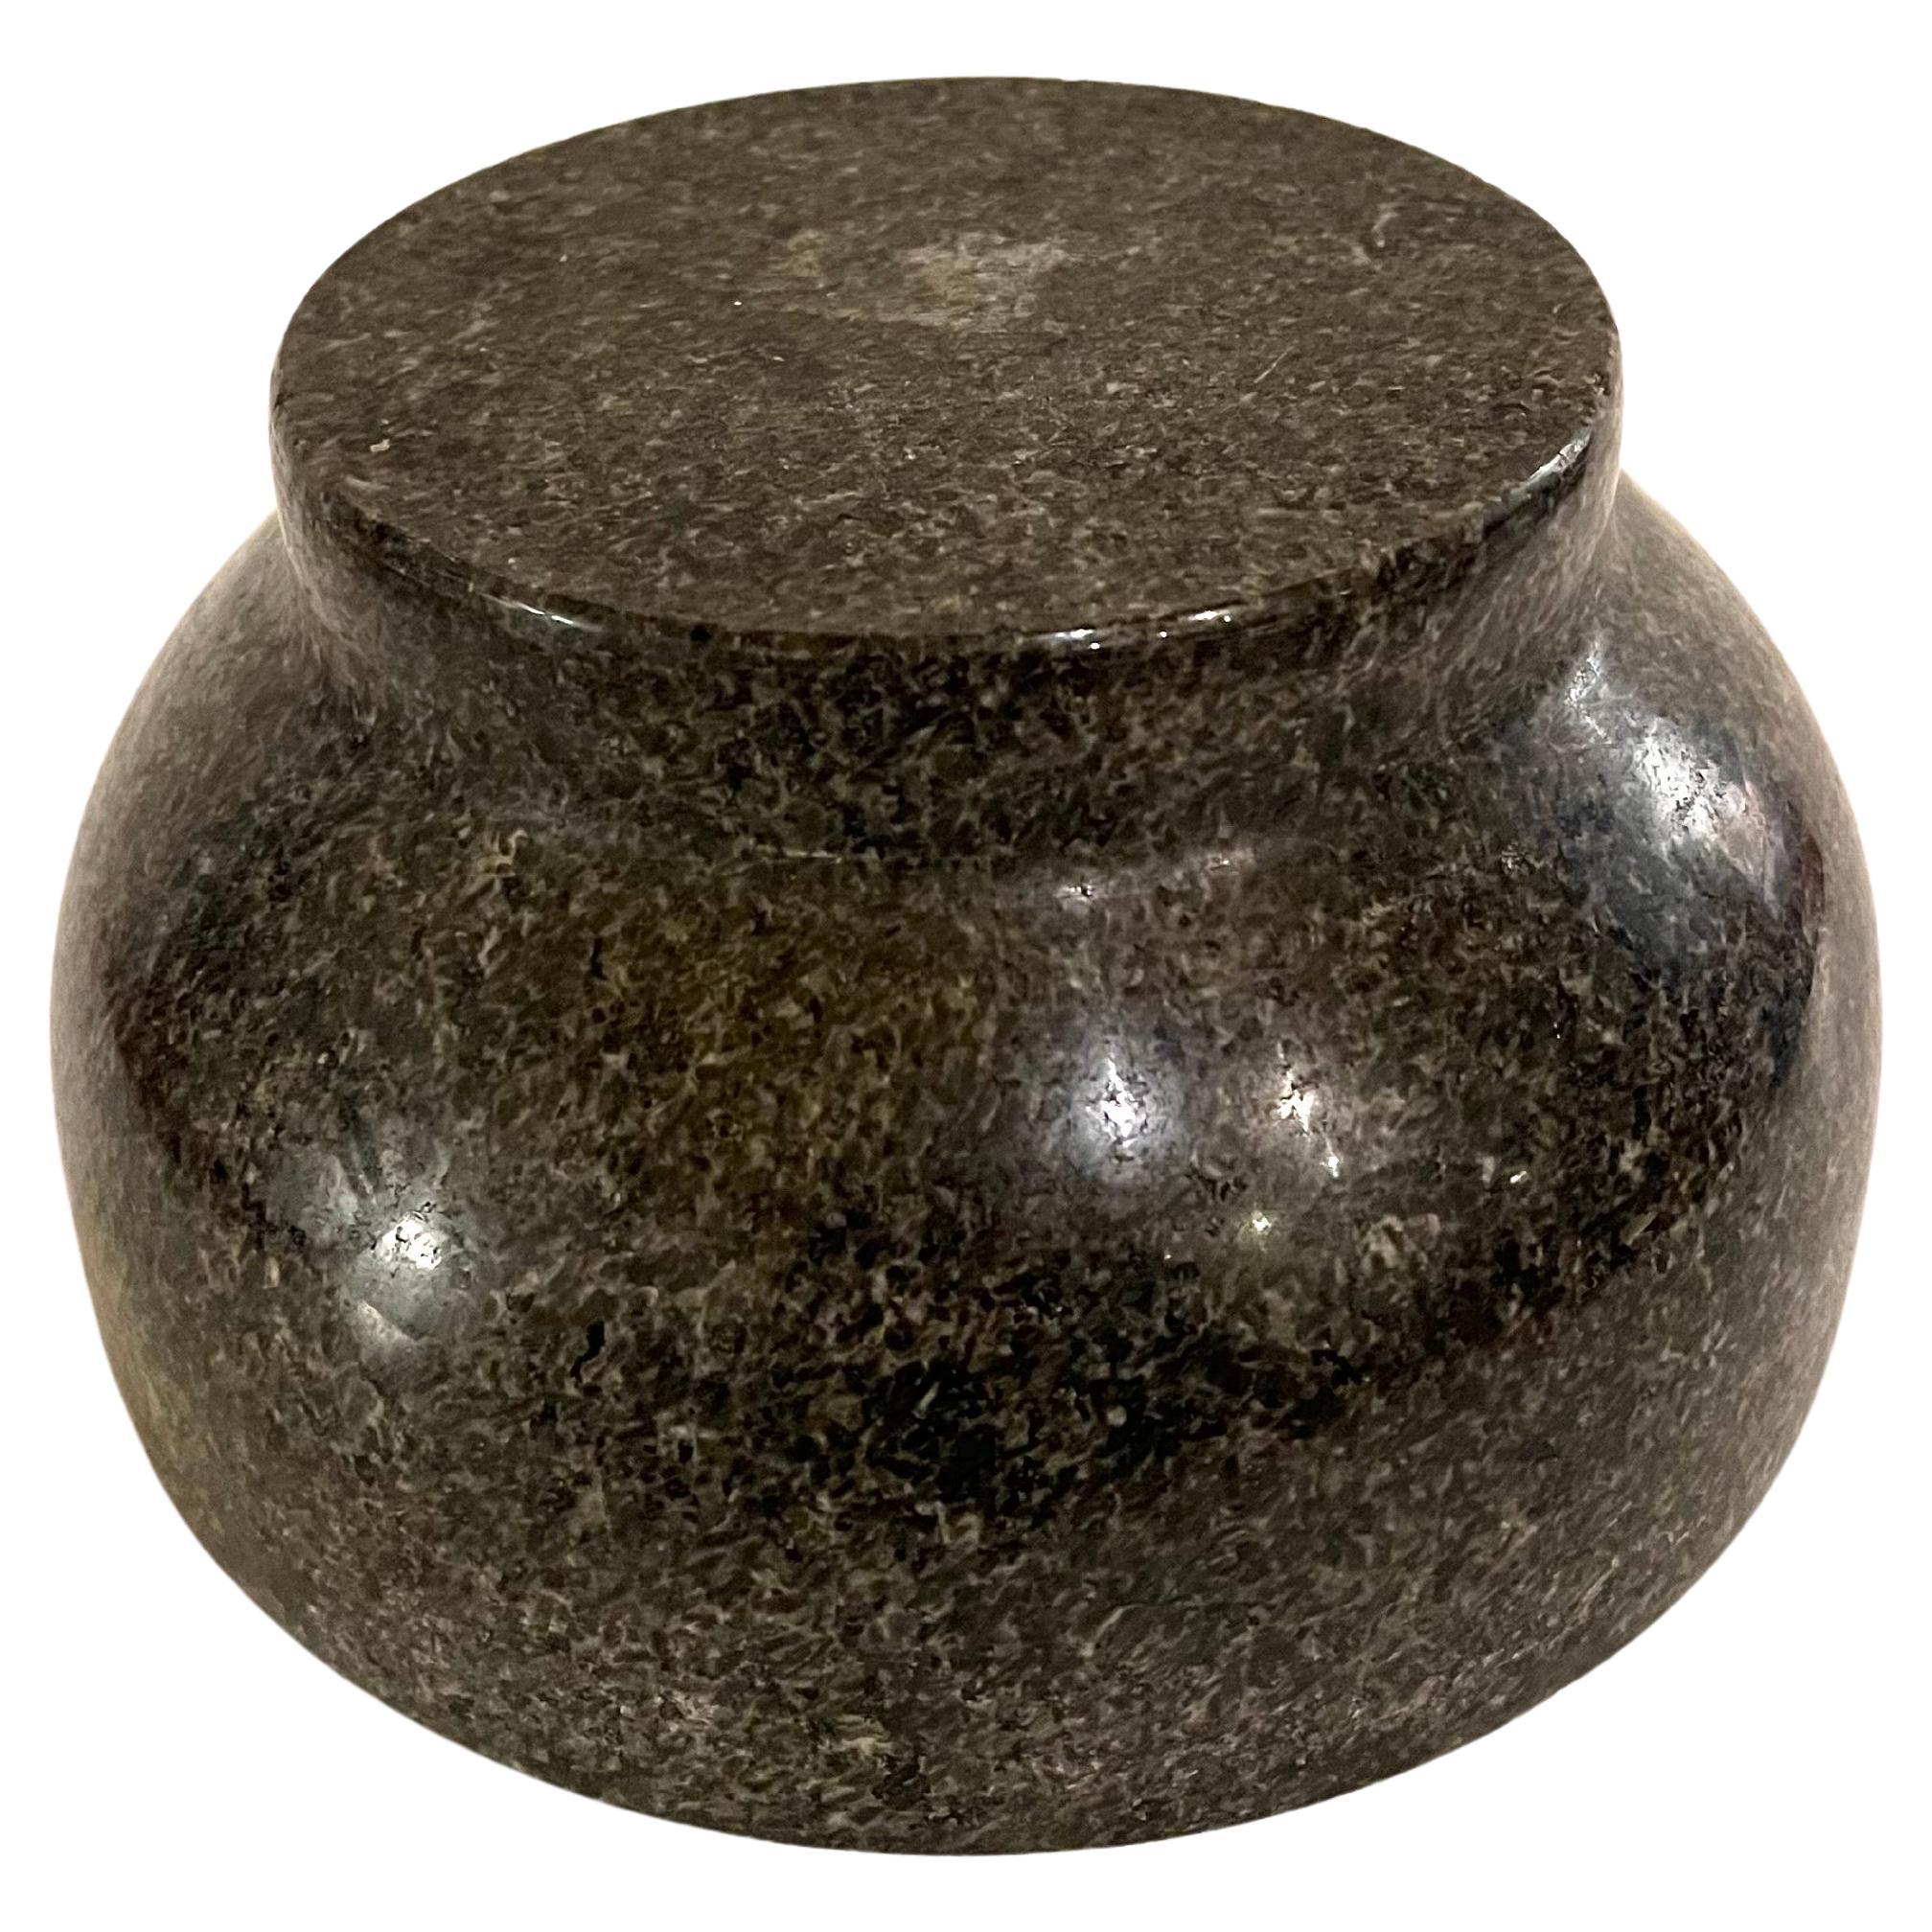 Postmodern Solid Polished Granite Massive Italian Footed Compote Bowl In Excellent Condition For Sale In San Diego, CA